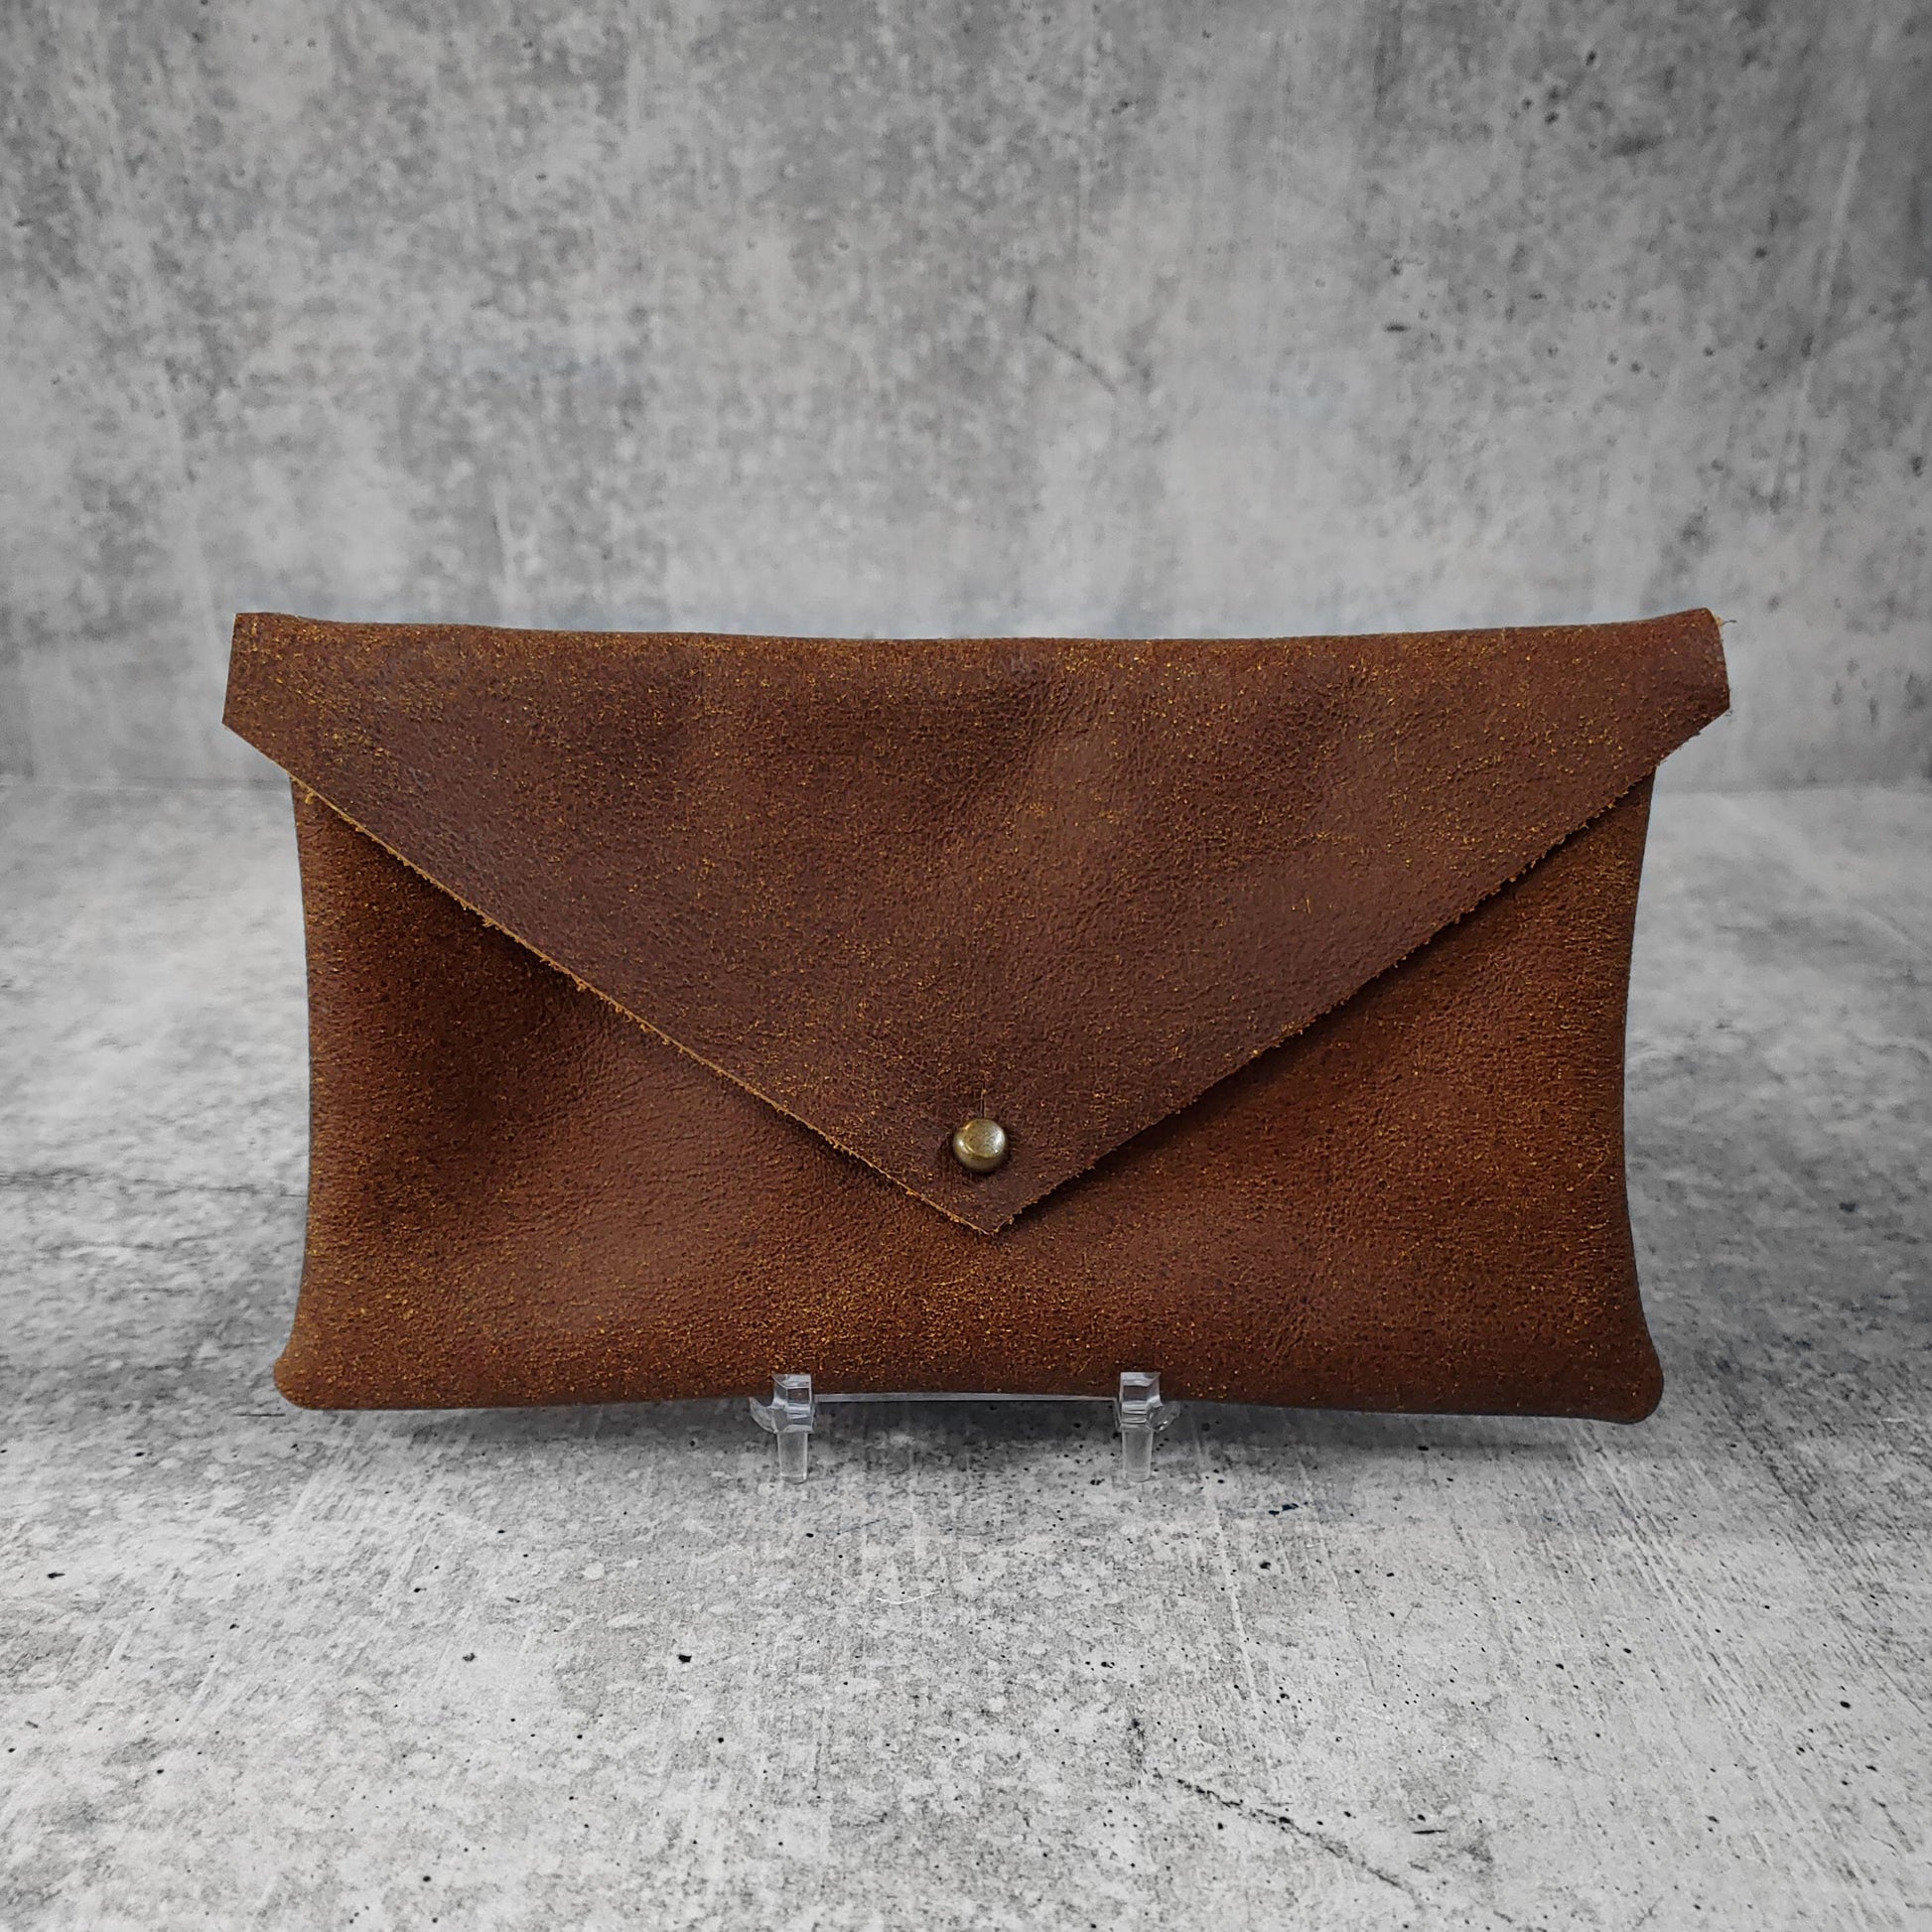 Front facing view of "soft leather clutch triangle" in walnut against a concrete background.